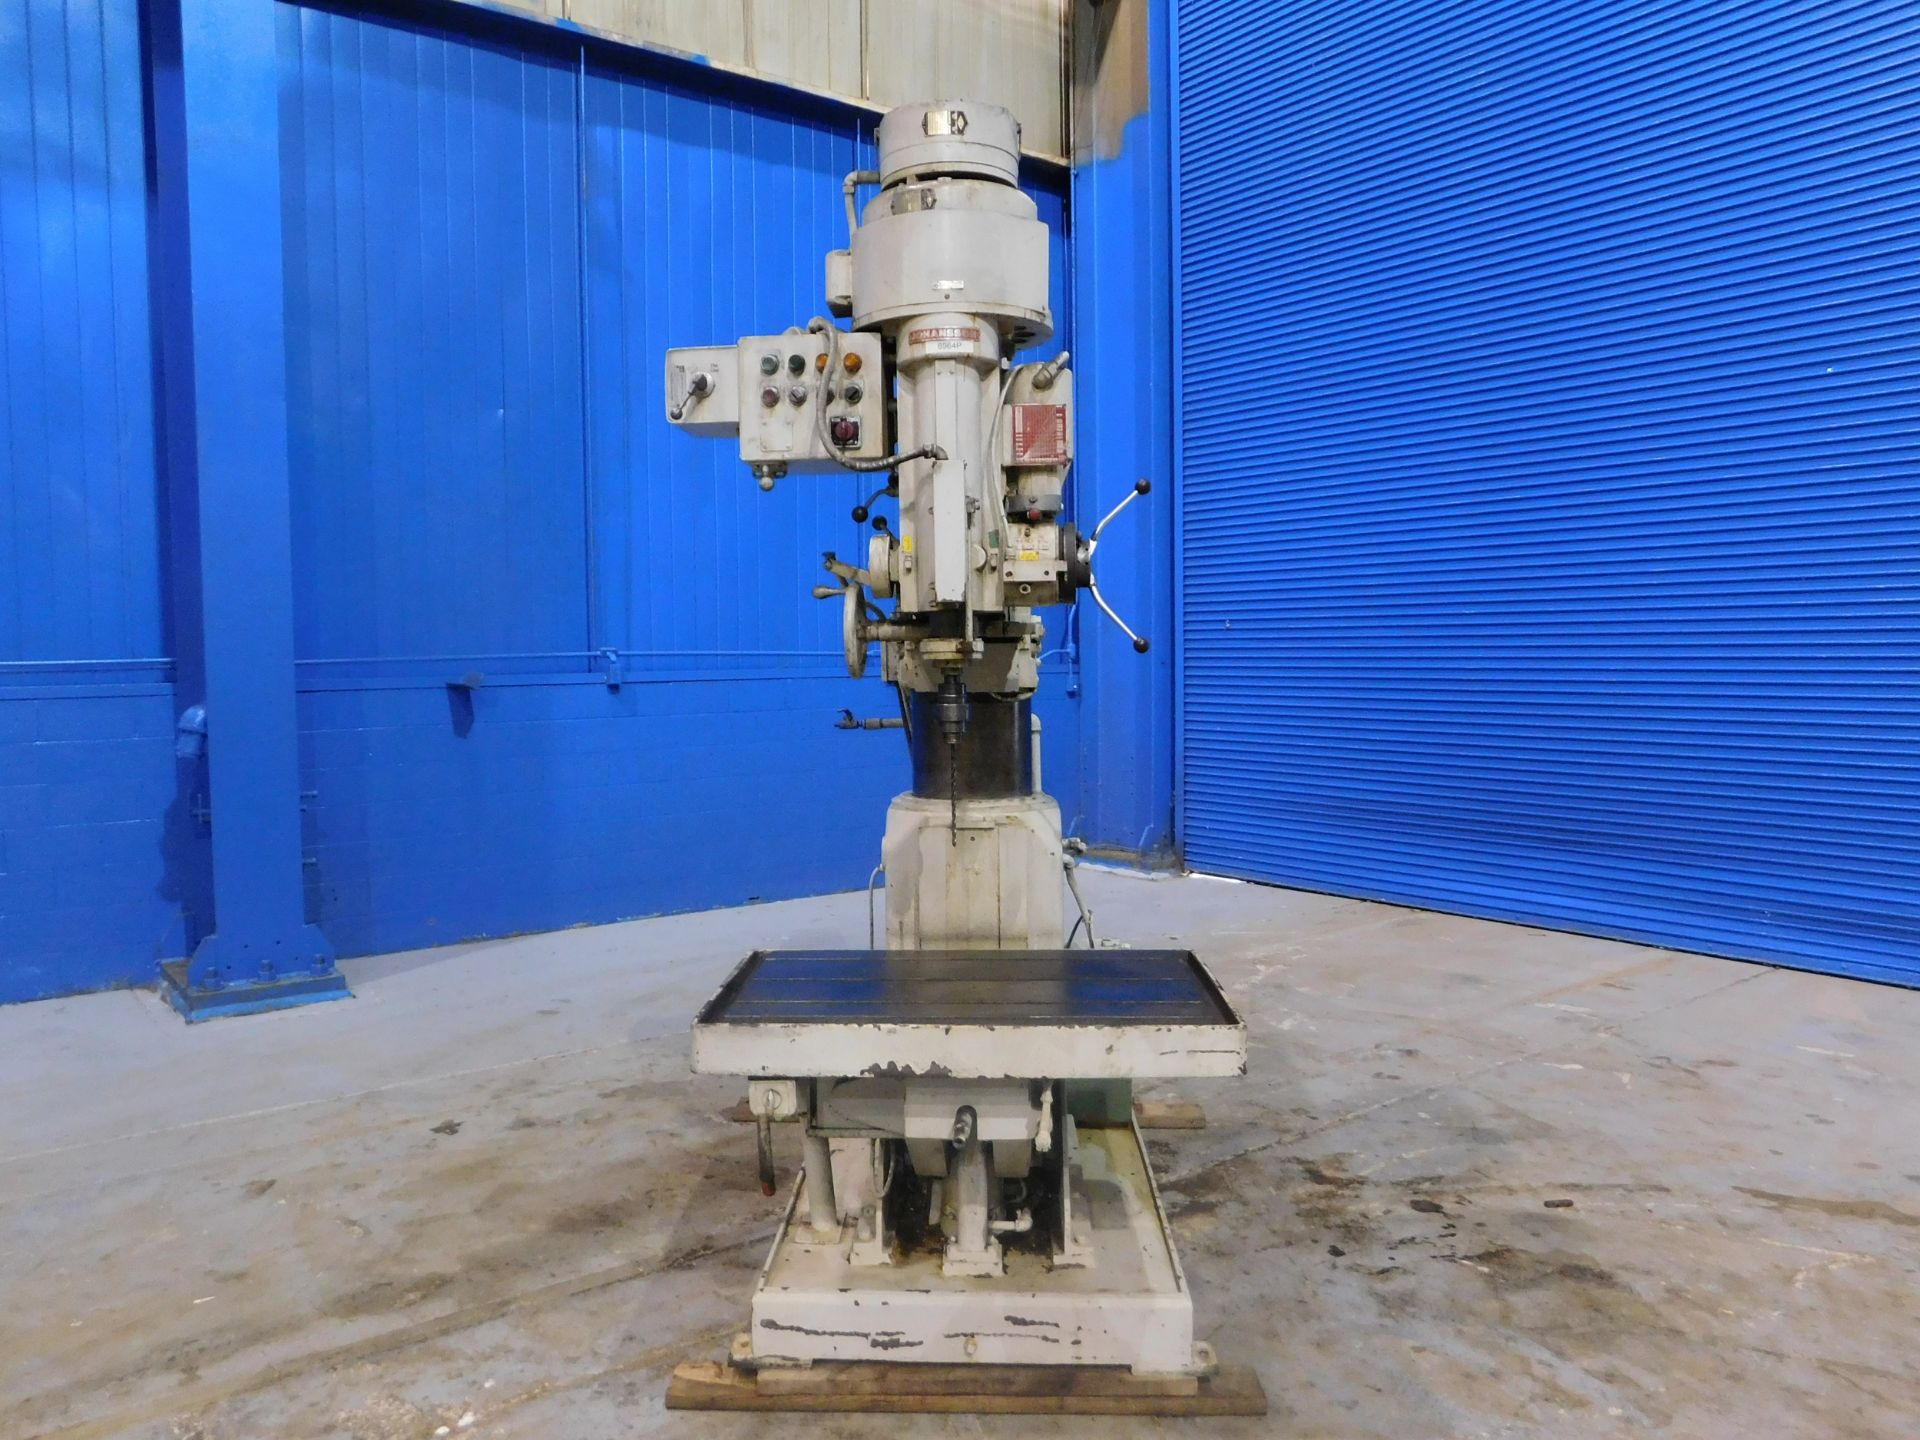 Johansson Radial Arm Drill, 3' x 11", S/N: 51621, Located In: Painesville, OH